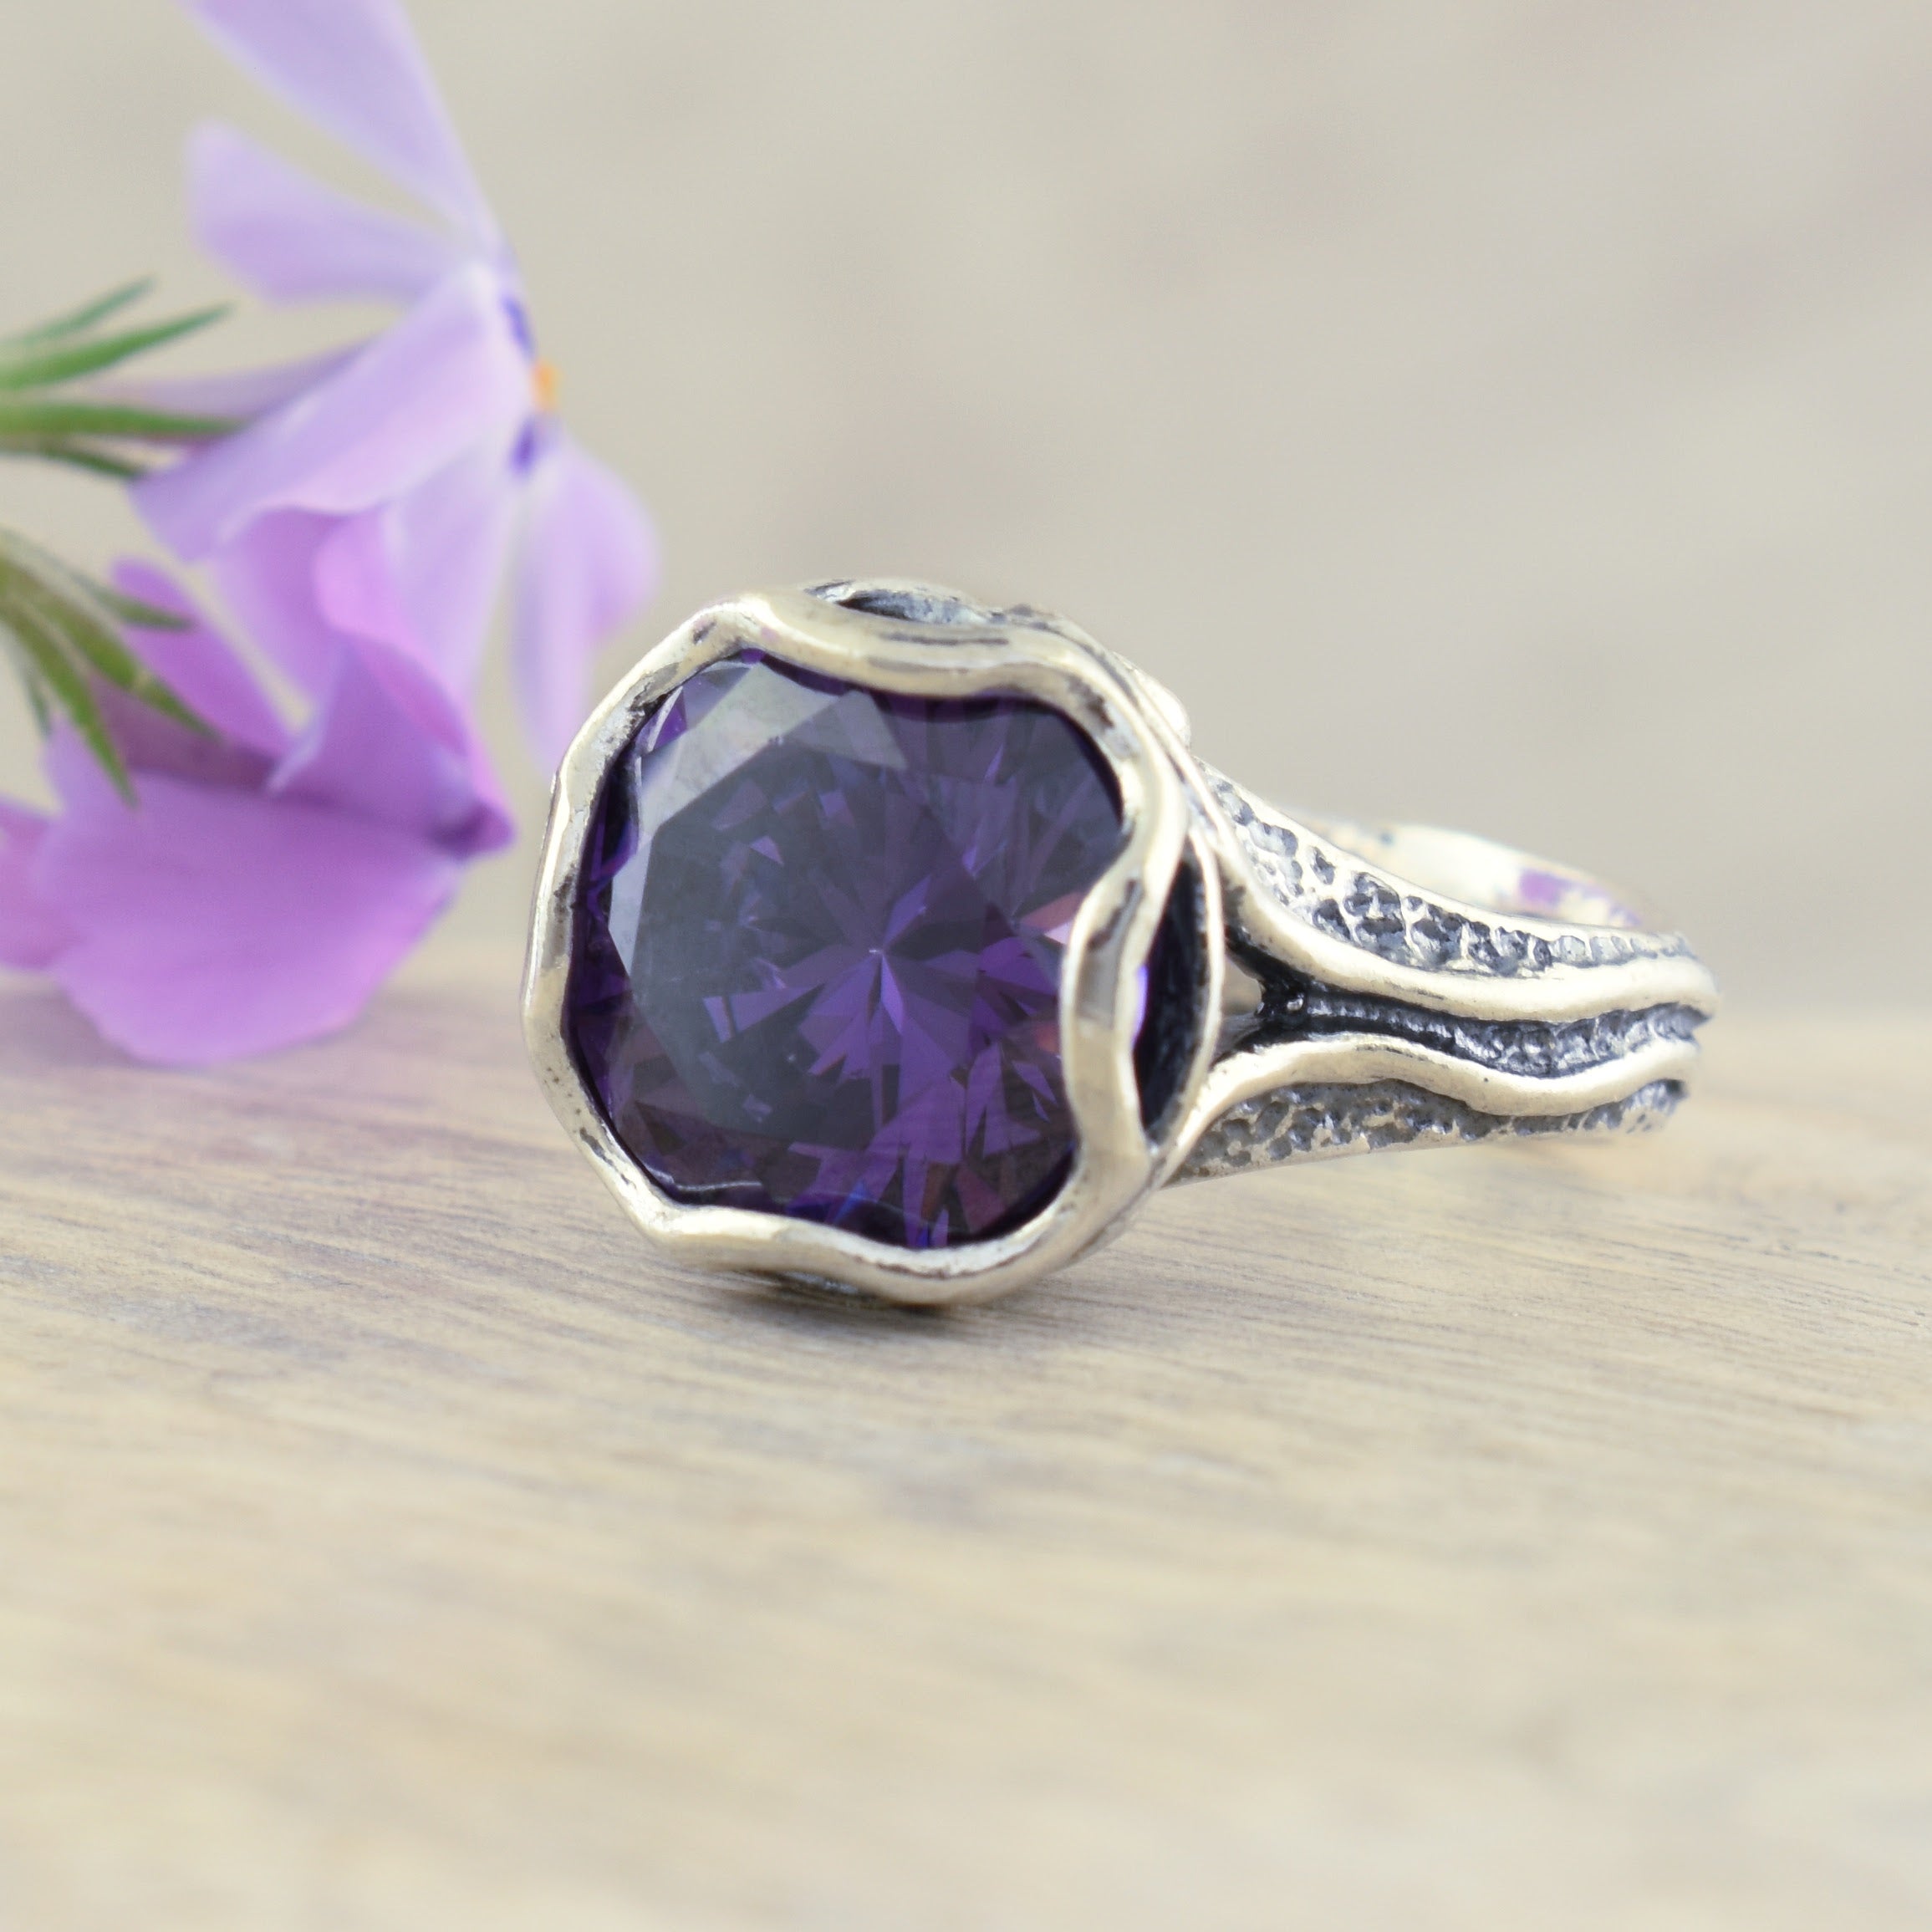 Plum Perfect Ring featured in .925 sterling silver and amethyst cz